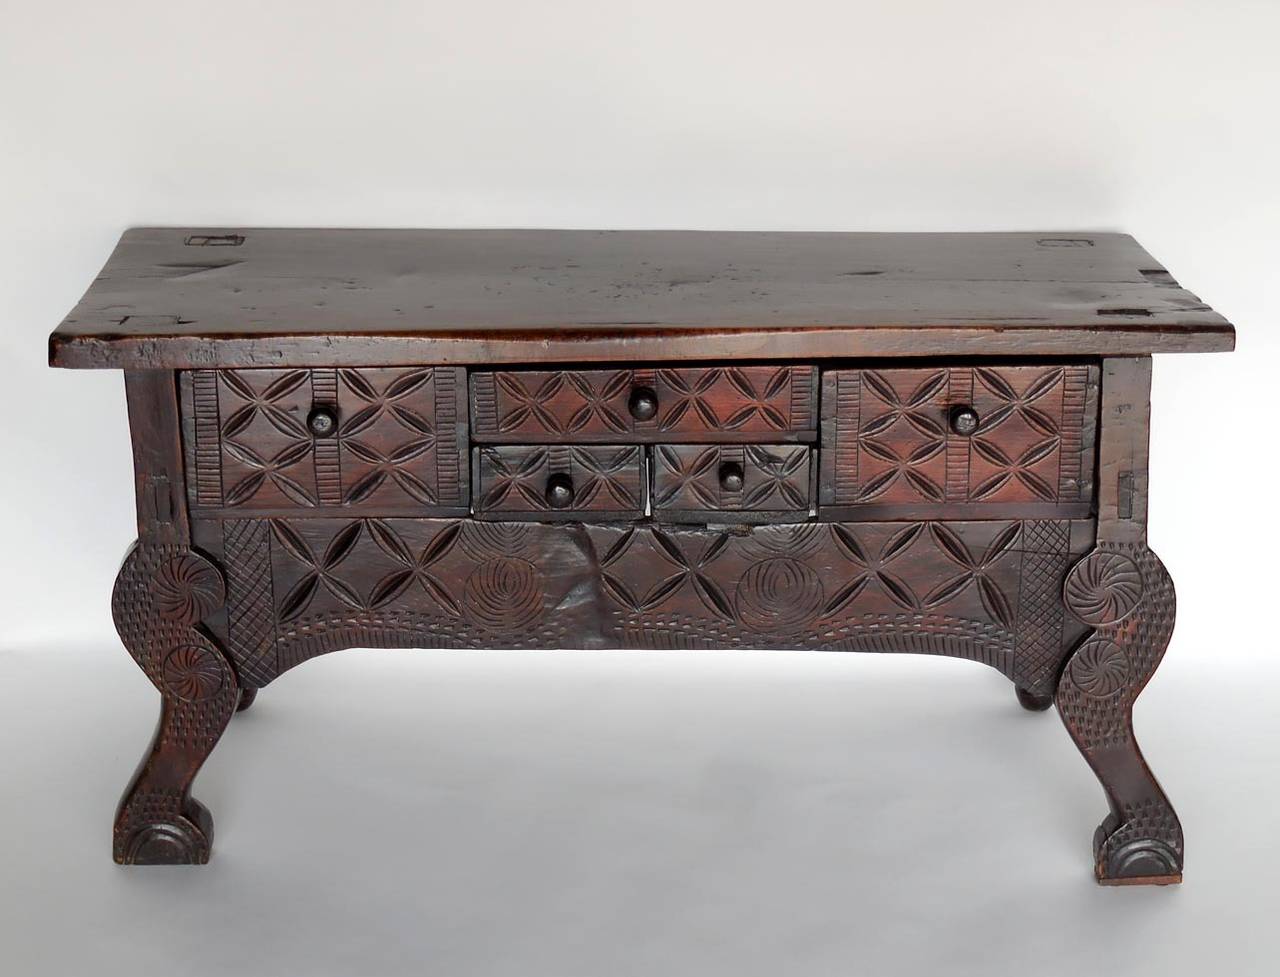 Antique Nahuala - animal spirit - table with five drawers from the highlands of Guatemala. Mortise and tenon construction. Hand-carved, beautiful patina, one wide board top. Carved rustic animal legs in front and turned legs in back. Piece of Folk